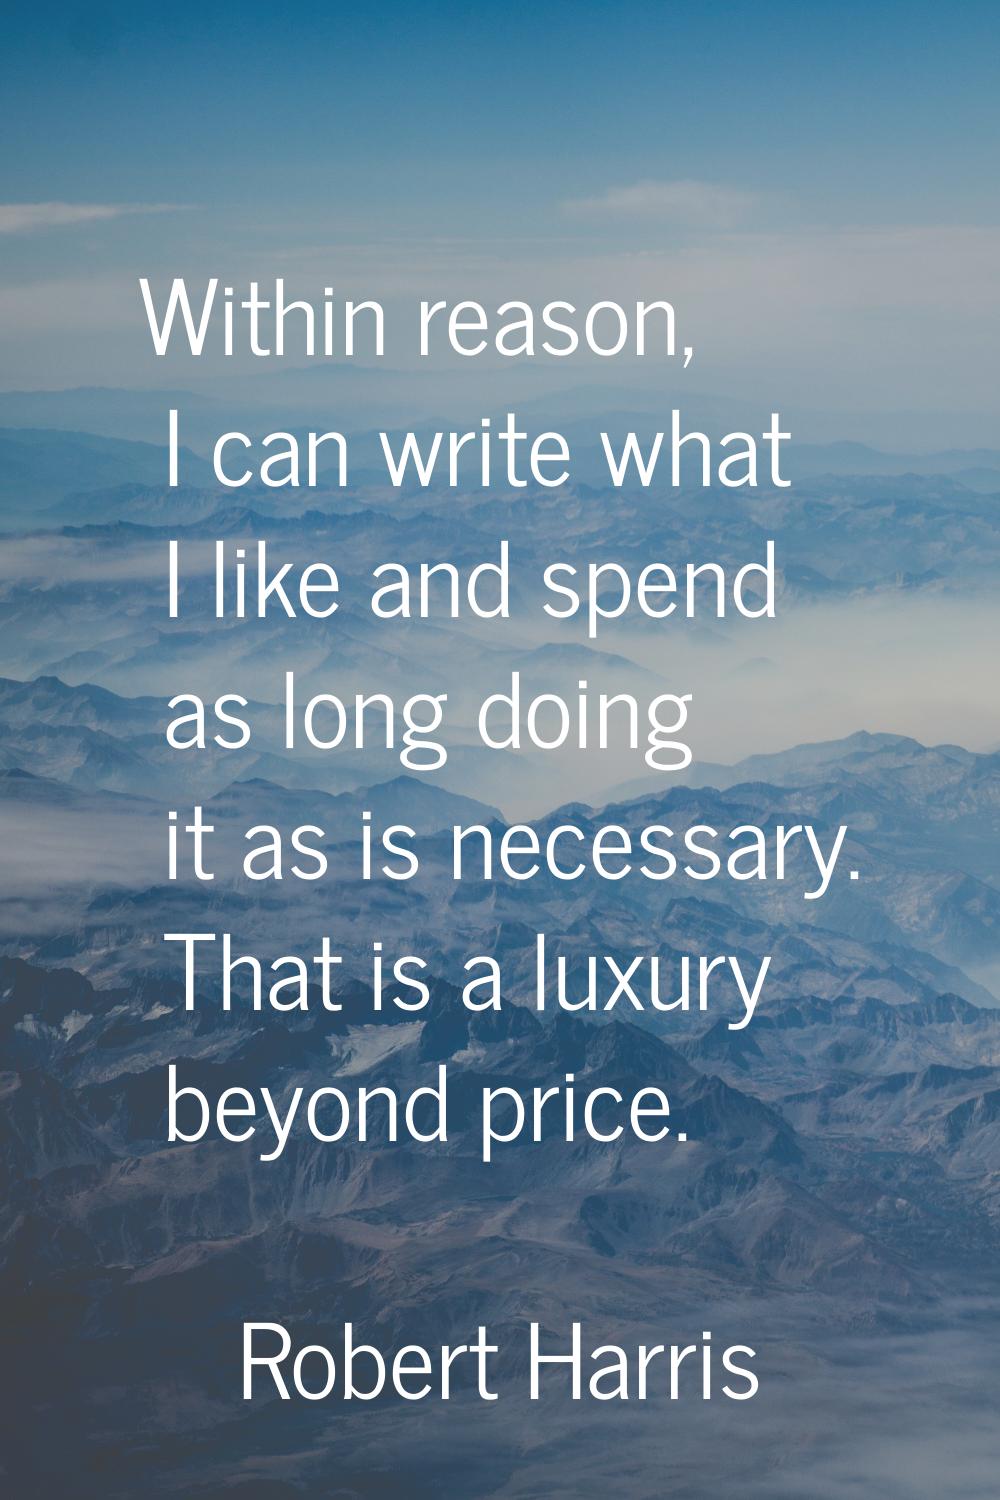 Within reason, I can write what I like and spend as long doing it as is necessary. That is a luxury